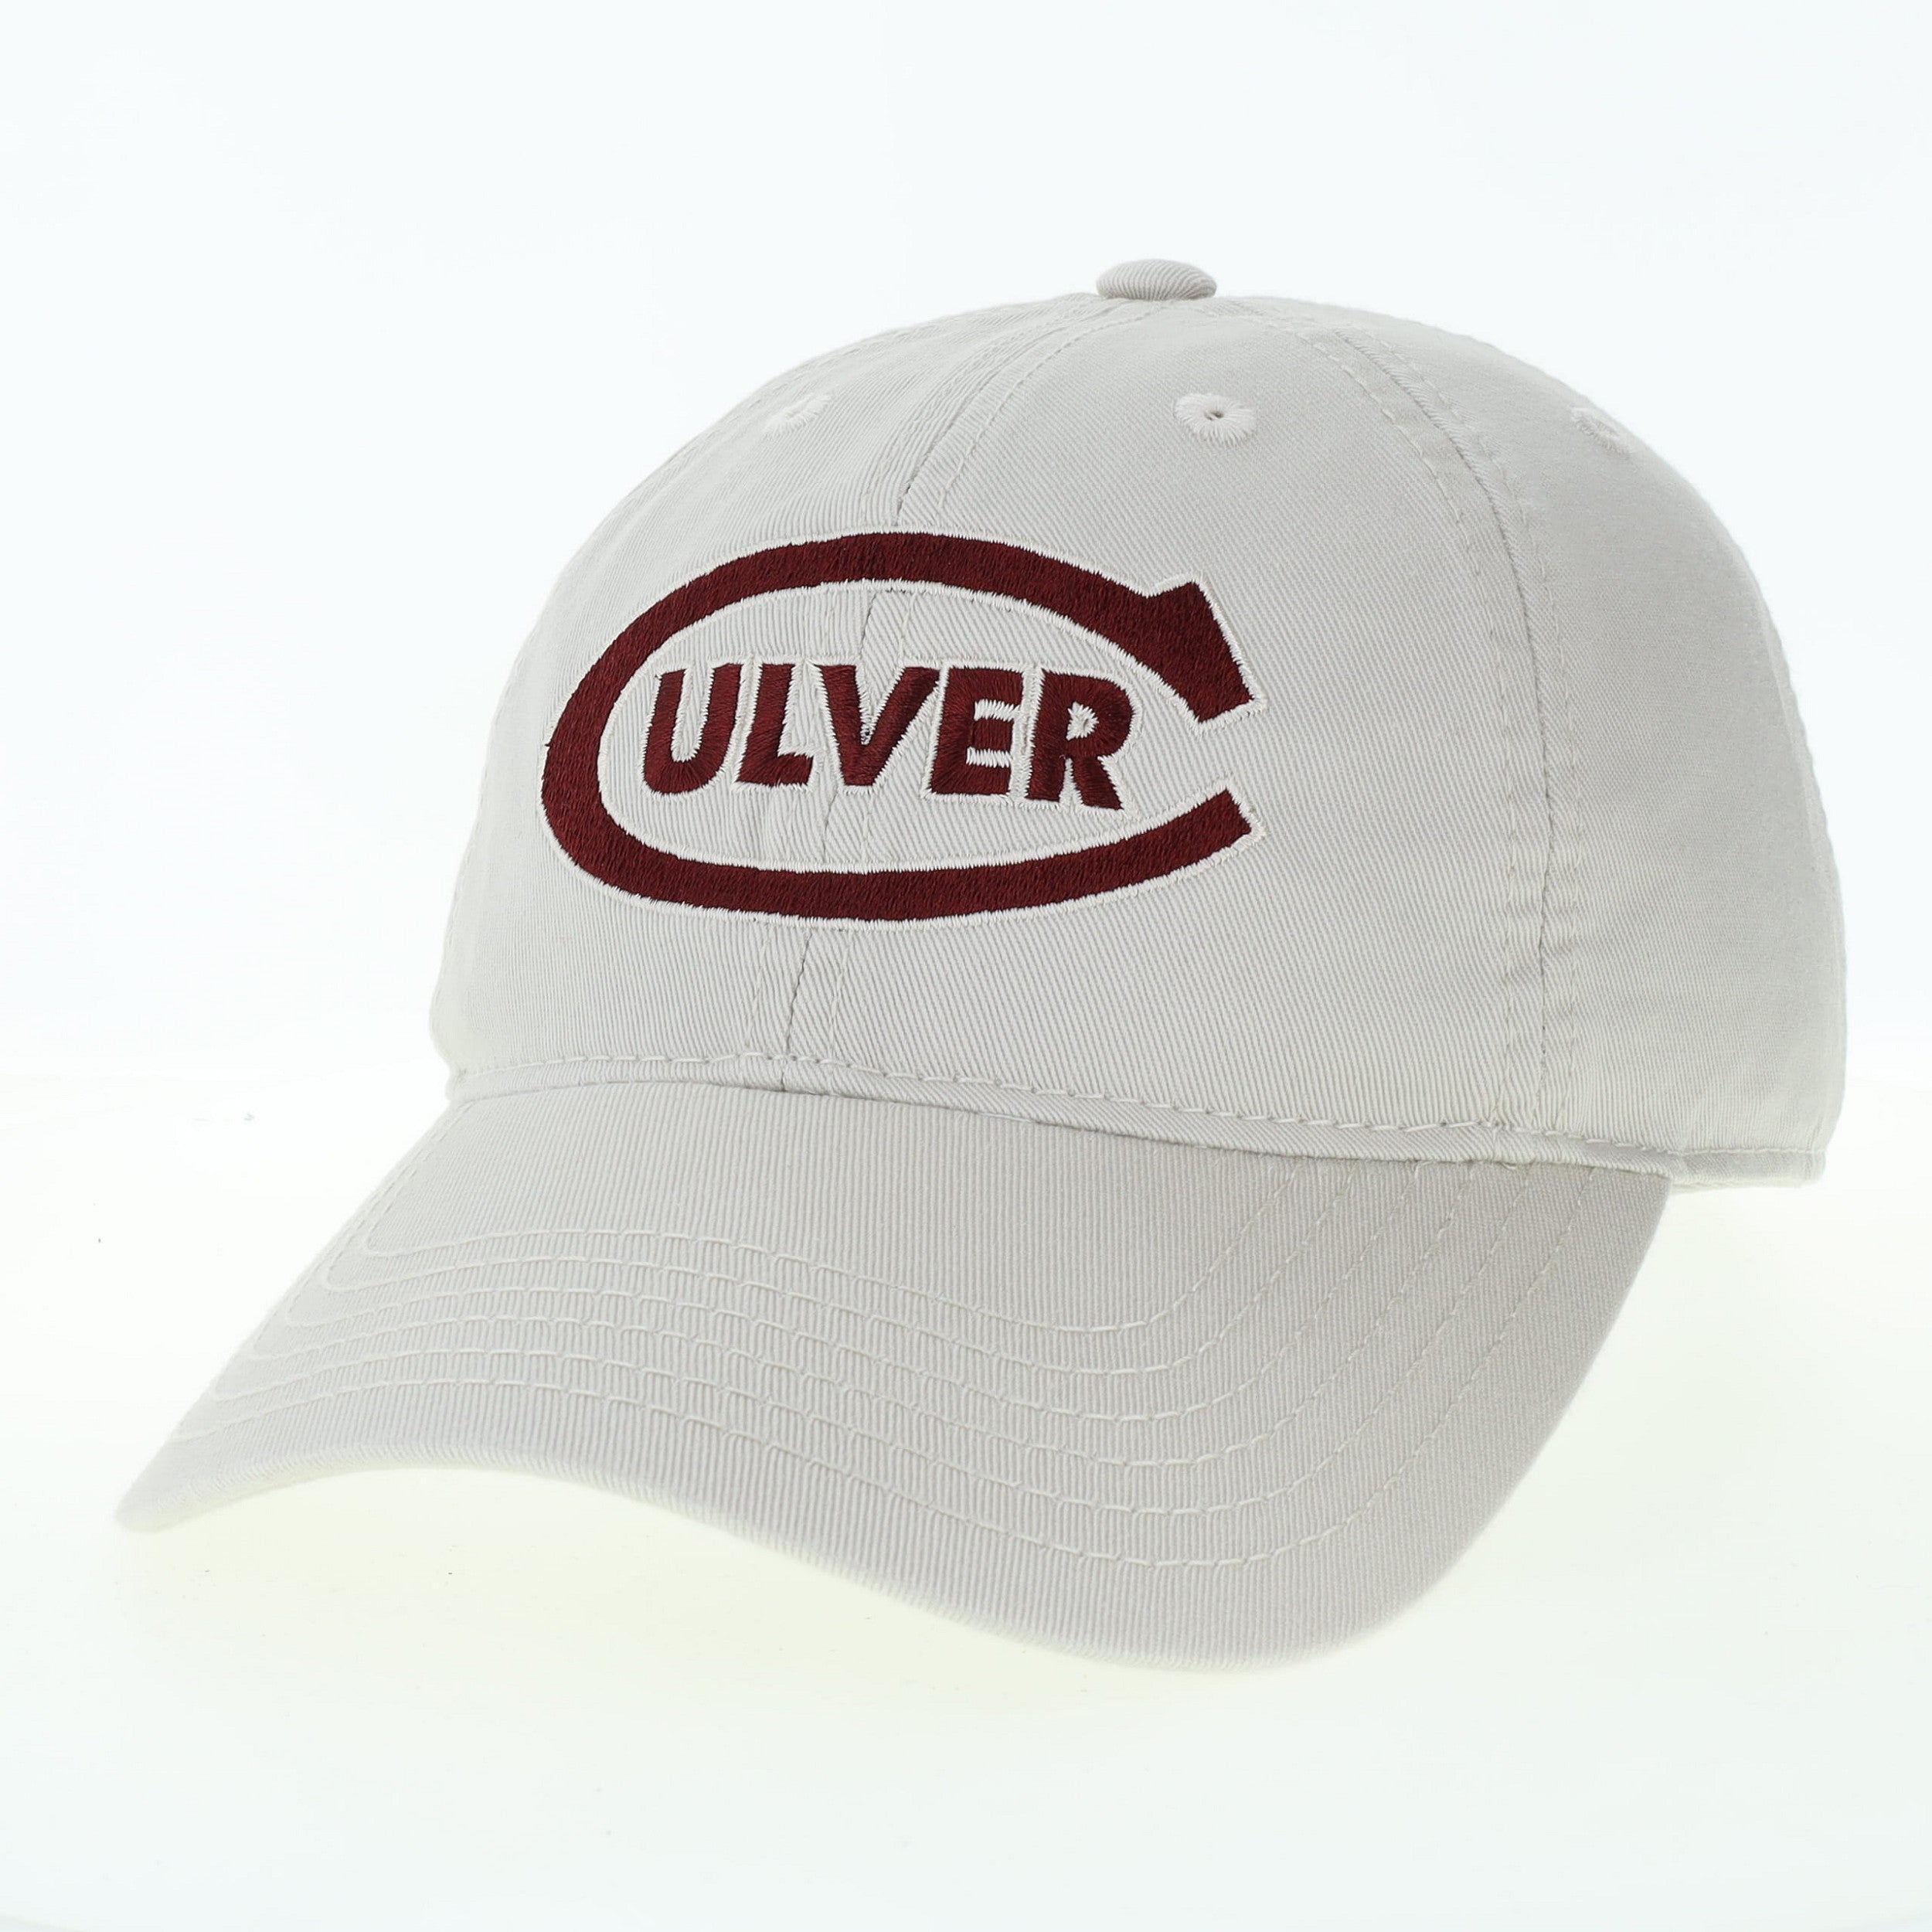 Culver-C Youth Hat - Stone